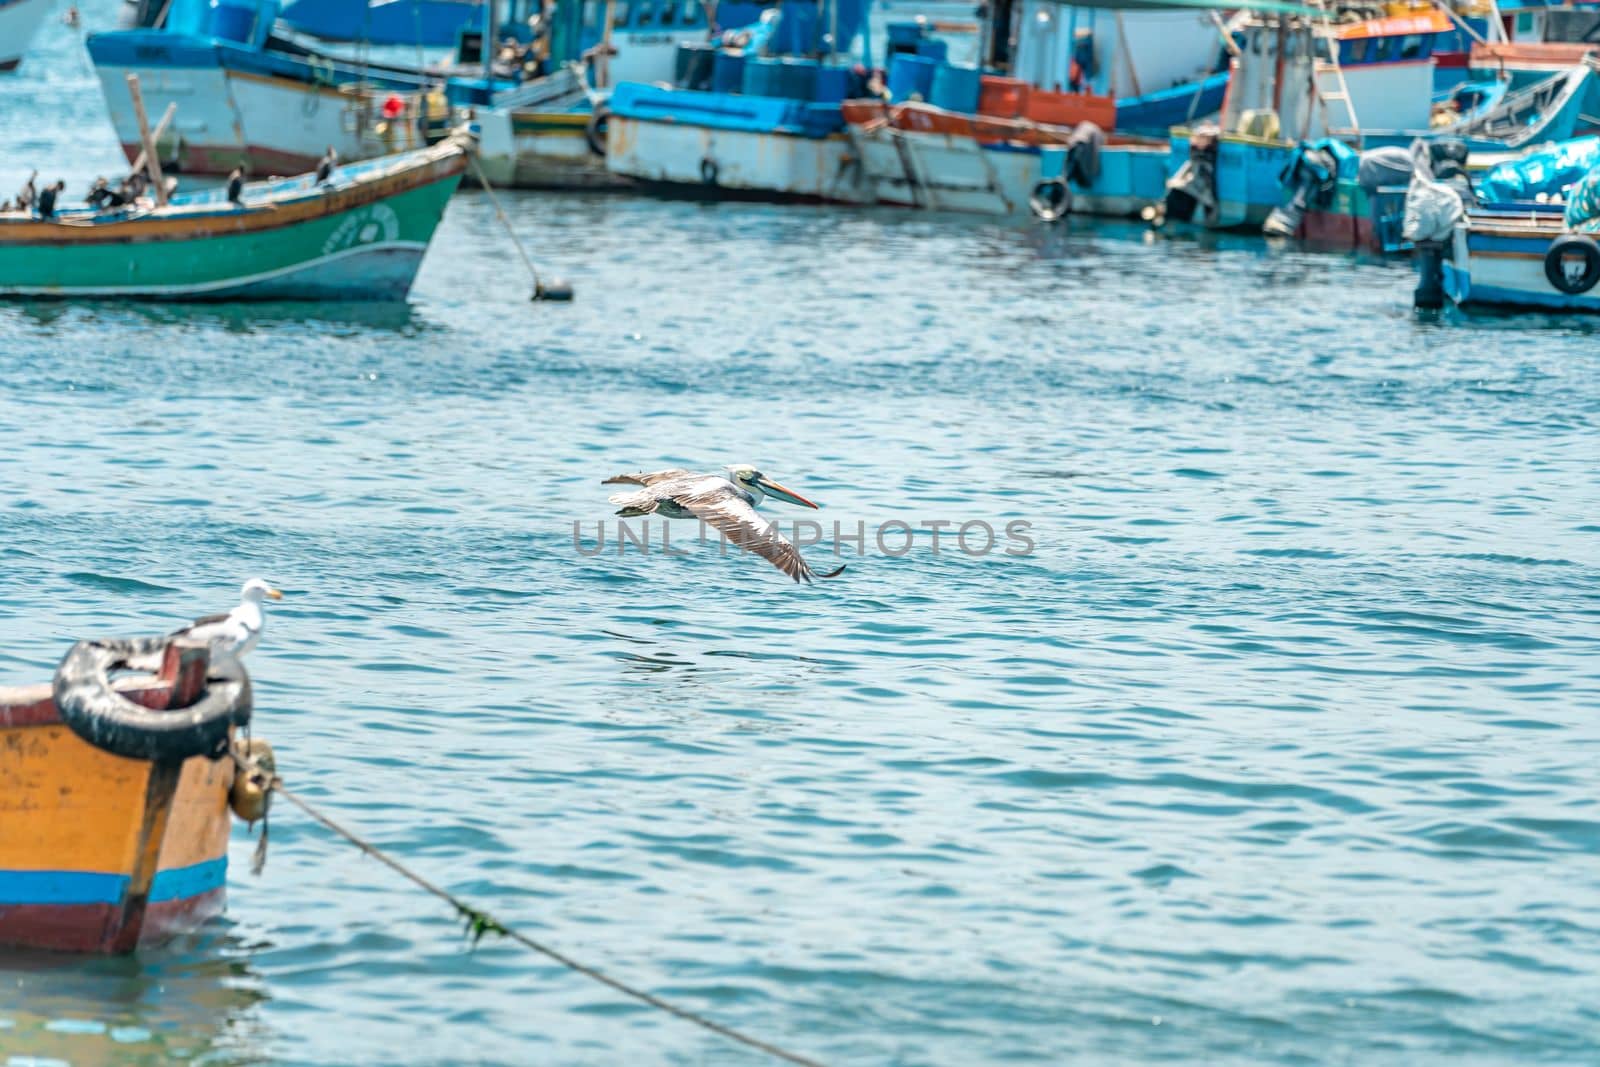 Peru - September 21, 2022: A pelican flies over the ocean near fishing boats by Edophoto